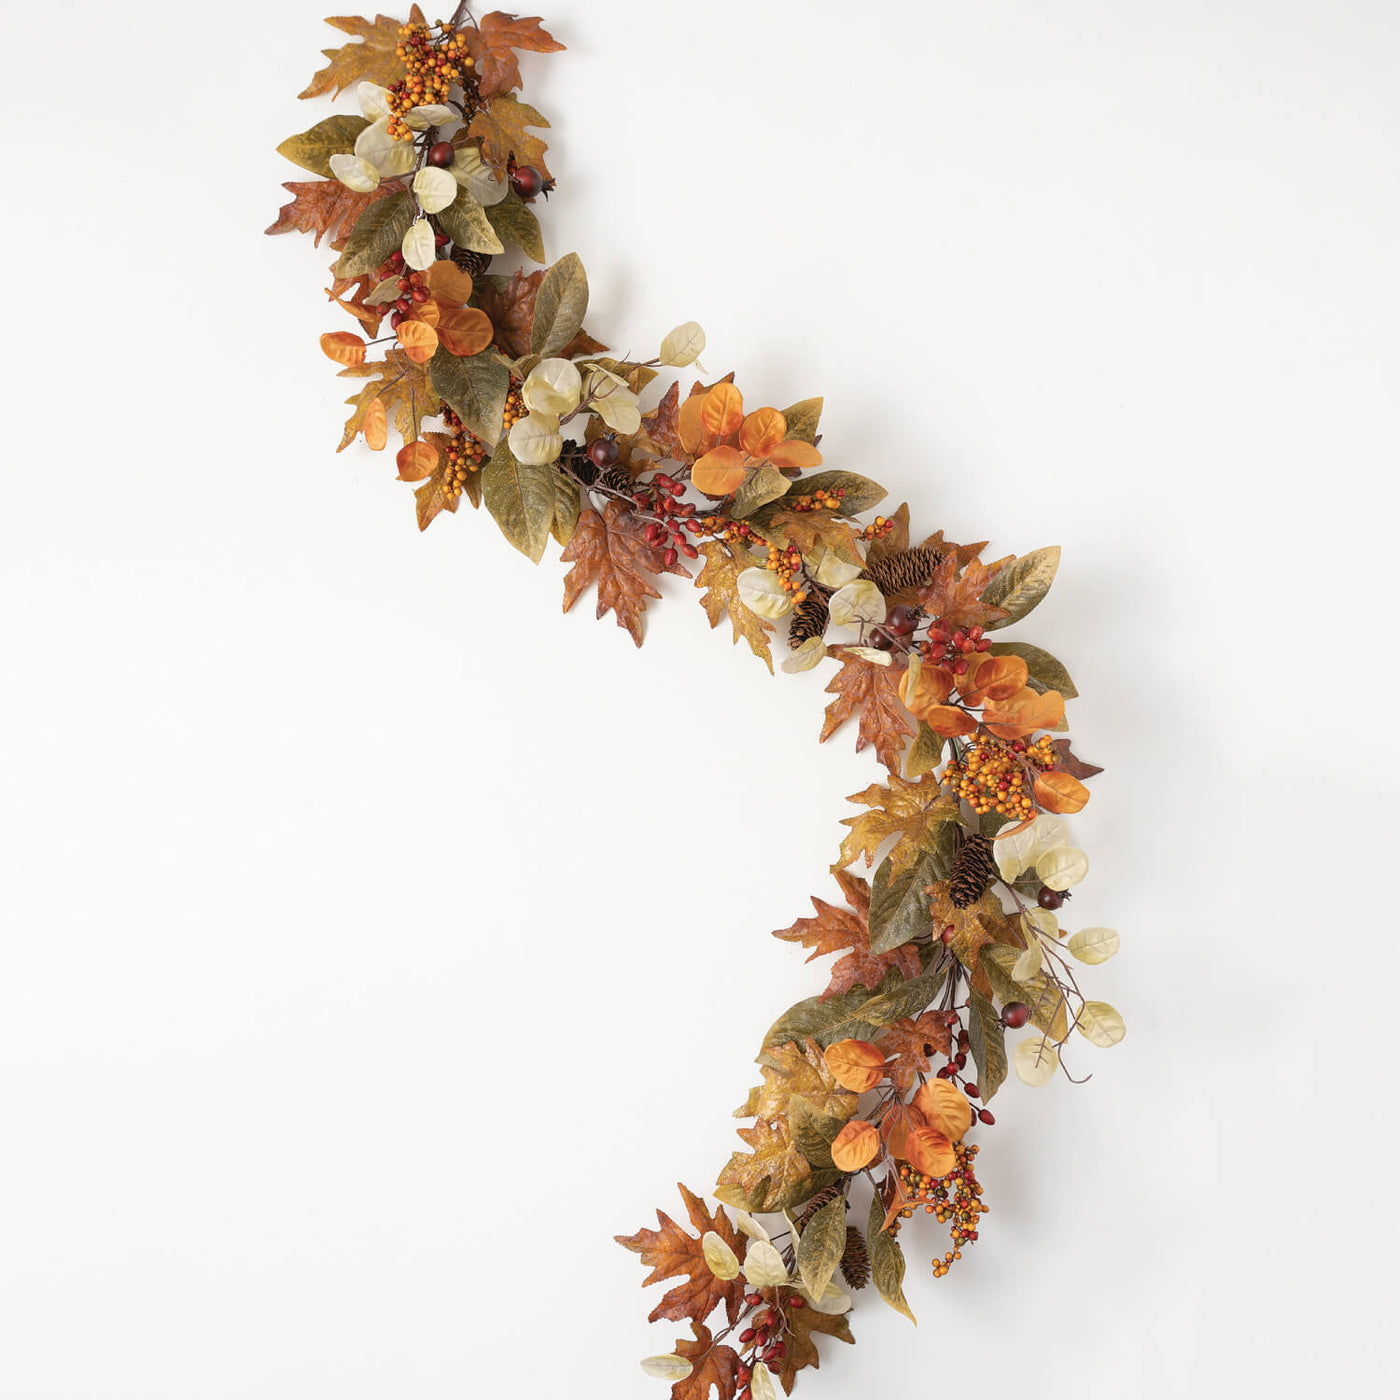 Garland of mixed fall leaves, berries, and pine cones